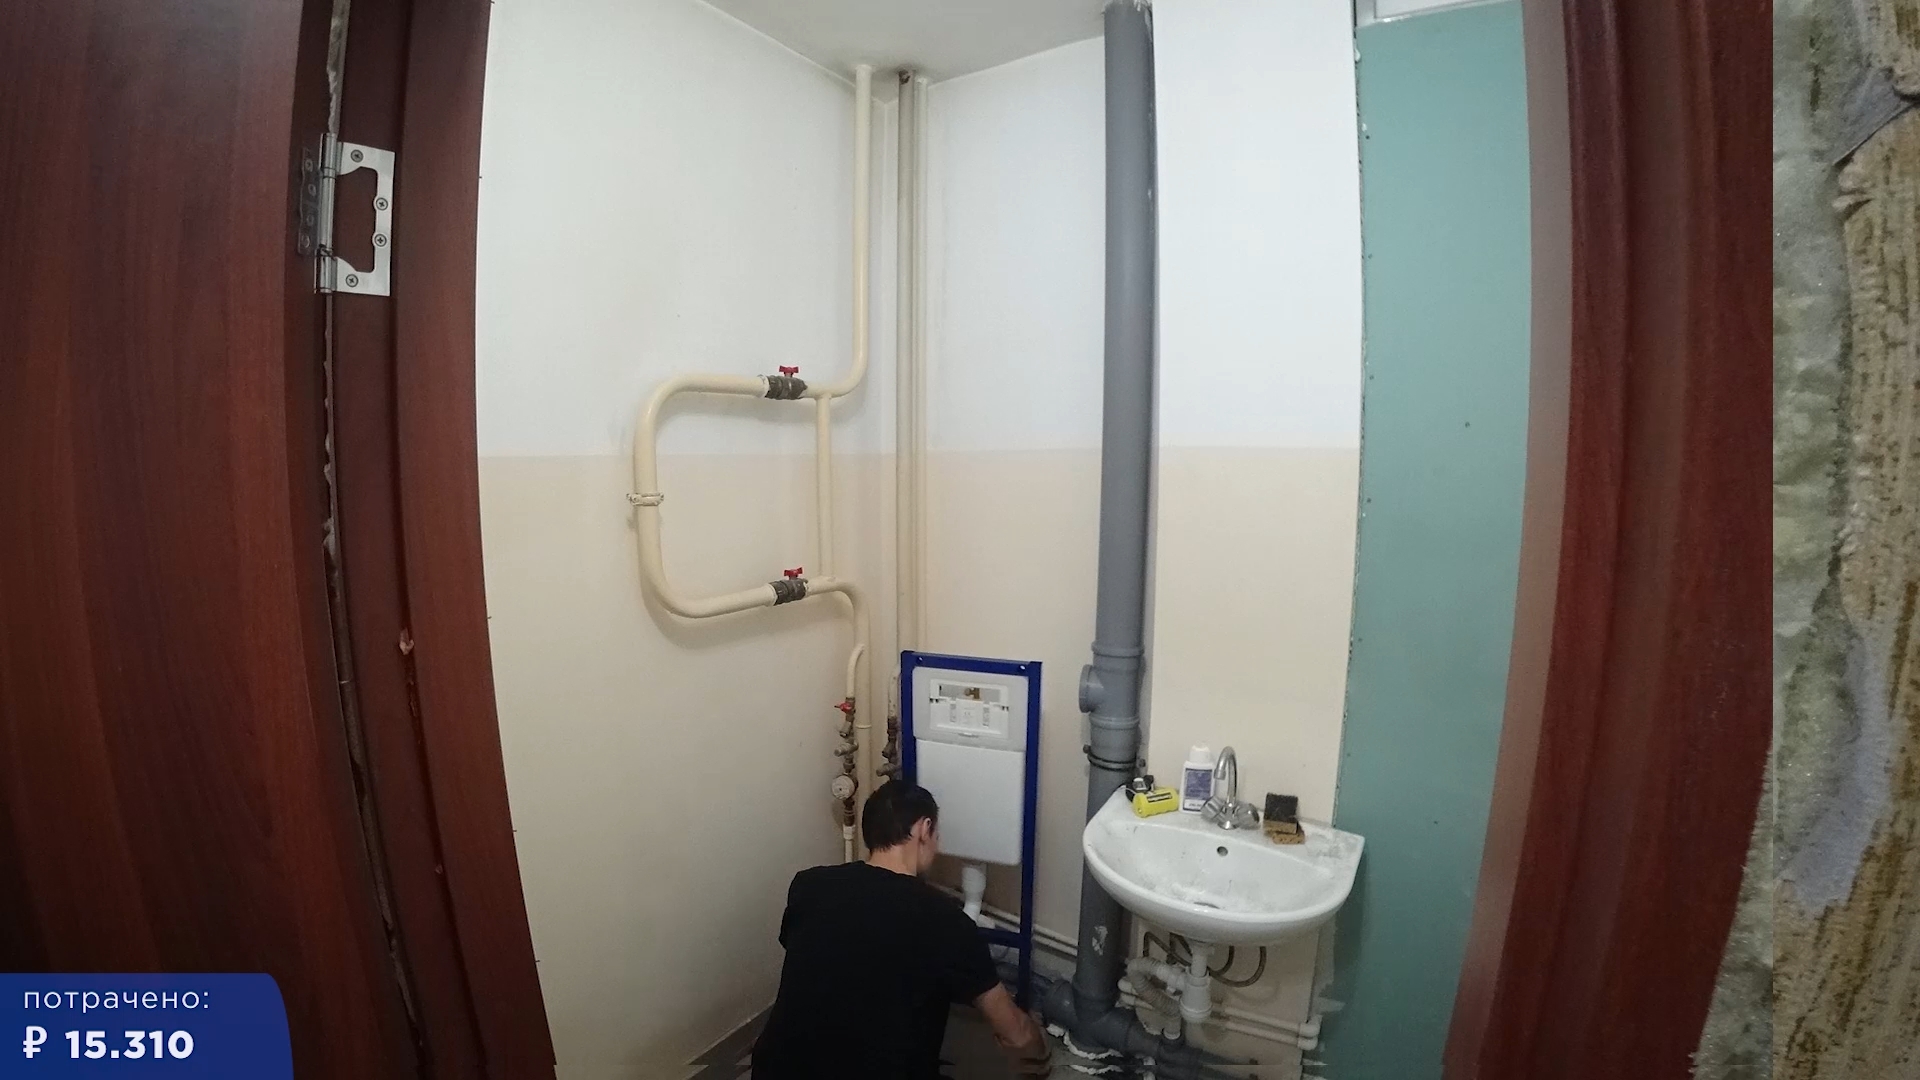 2.1 Bathroom renovation. Installation (Apartment renovation) - My, Longpost, Video, Bathroom renovation, Installation, Repair, With your own hands